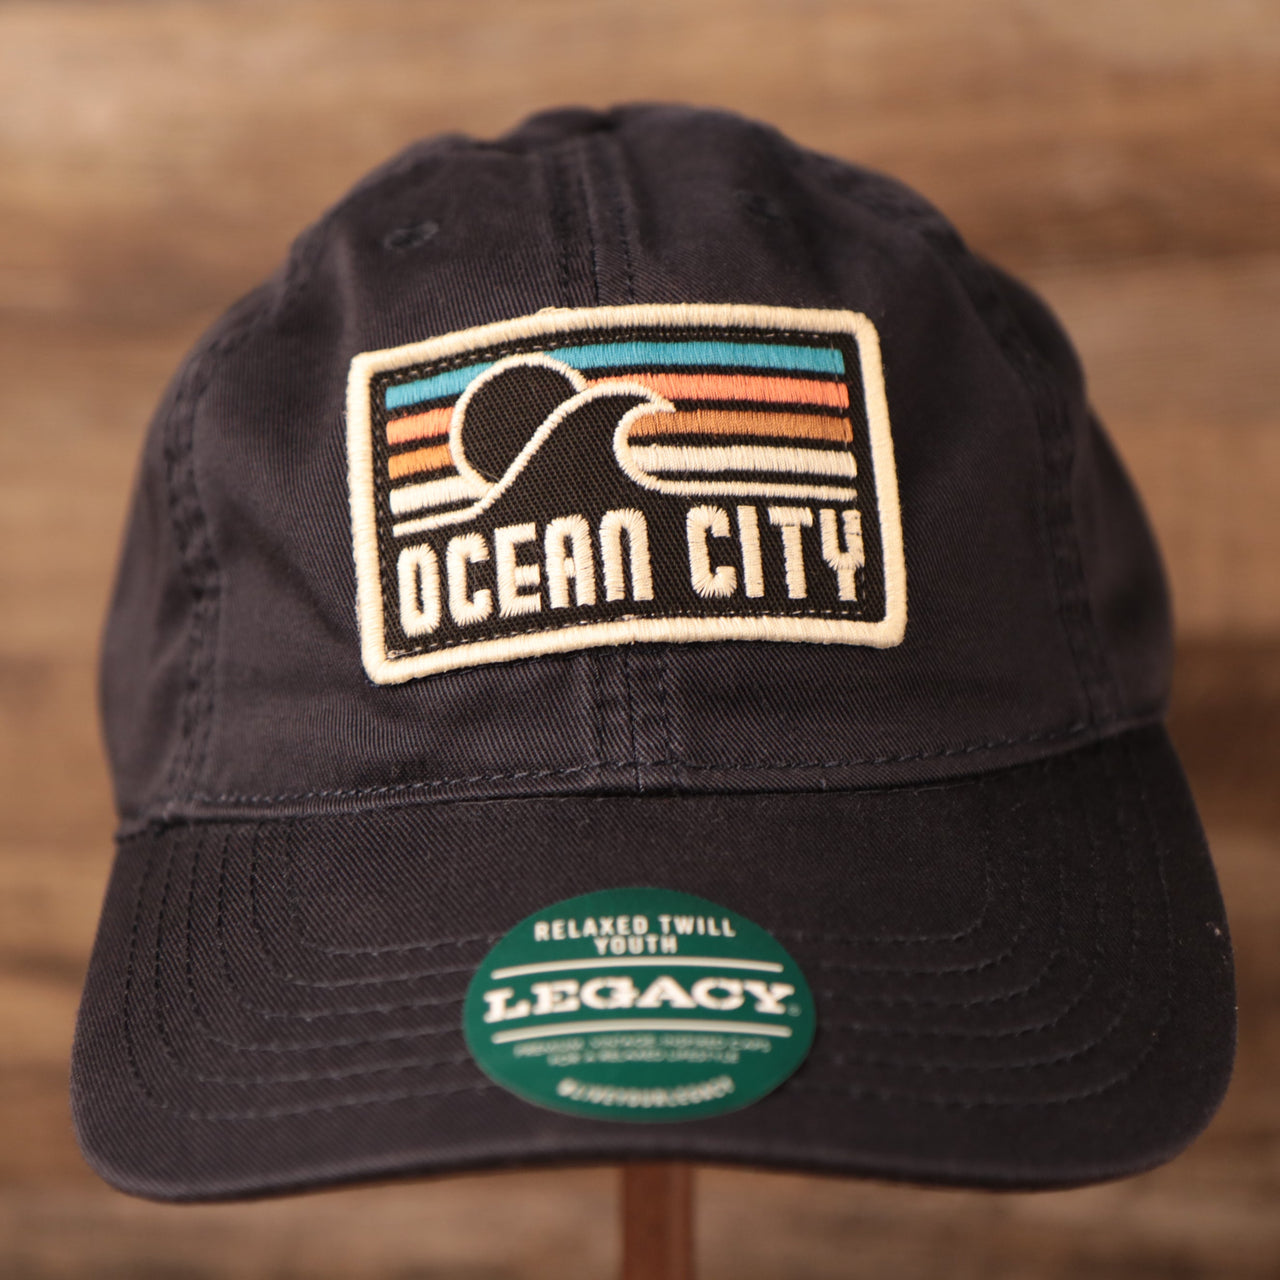 YOUTH SIZED LEAGUE LEGACY | TRUCKER HAT| OCEAN CITY NEW JERSEY | RECTANGULAR WAVE PATCH  | NAVY BLUE